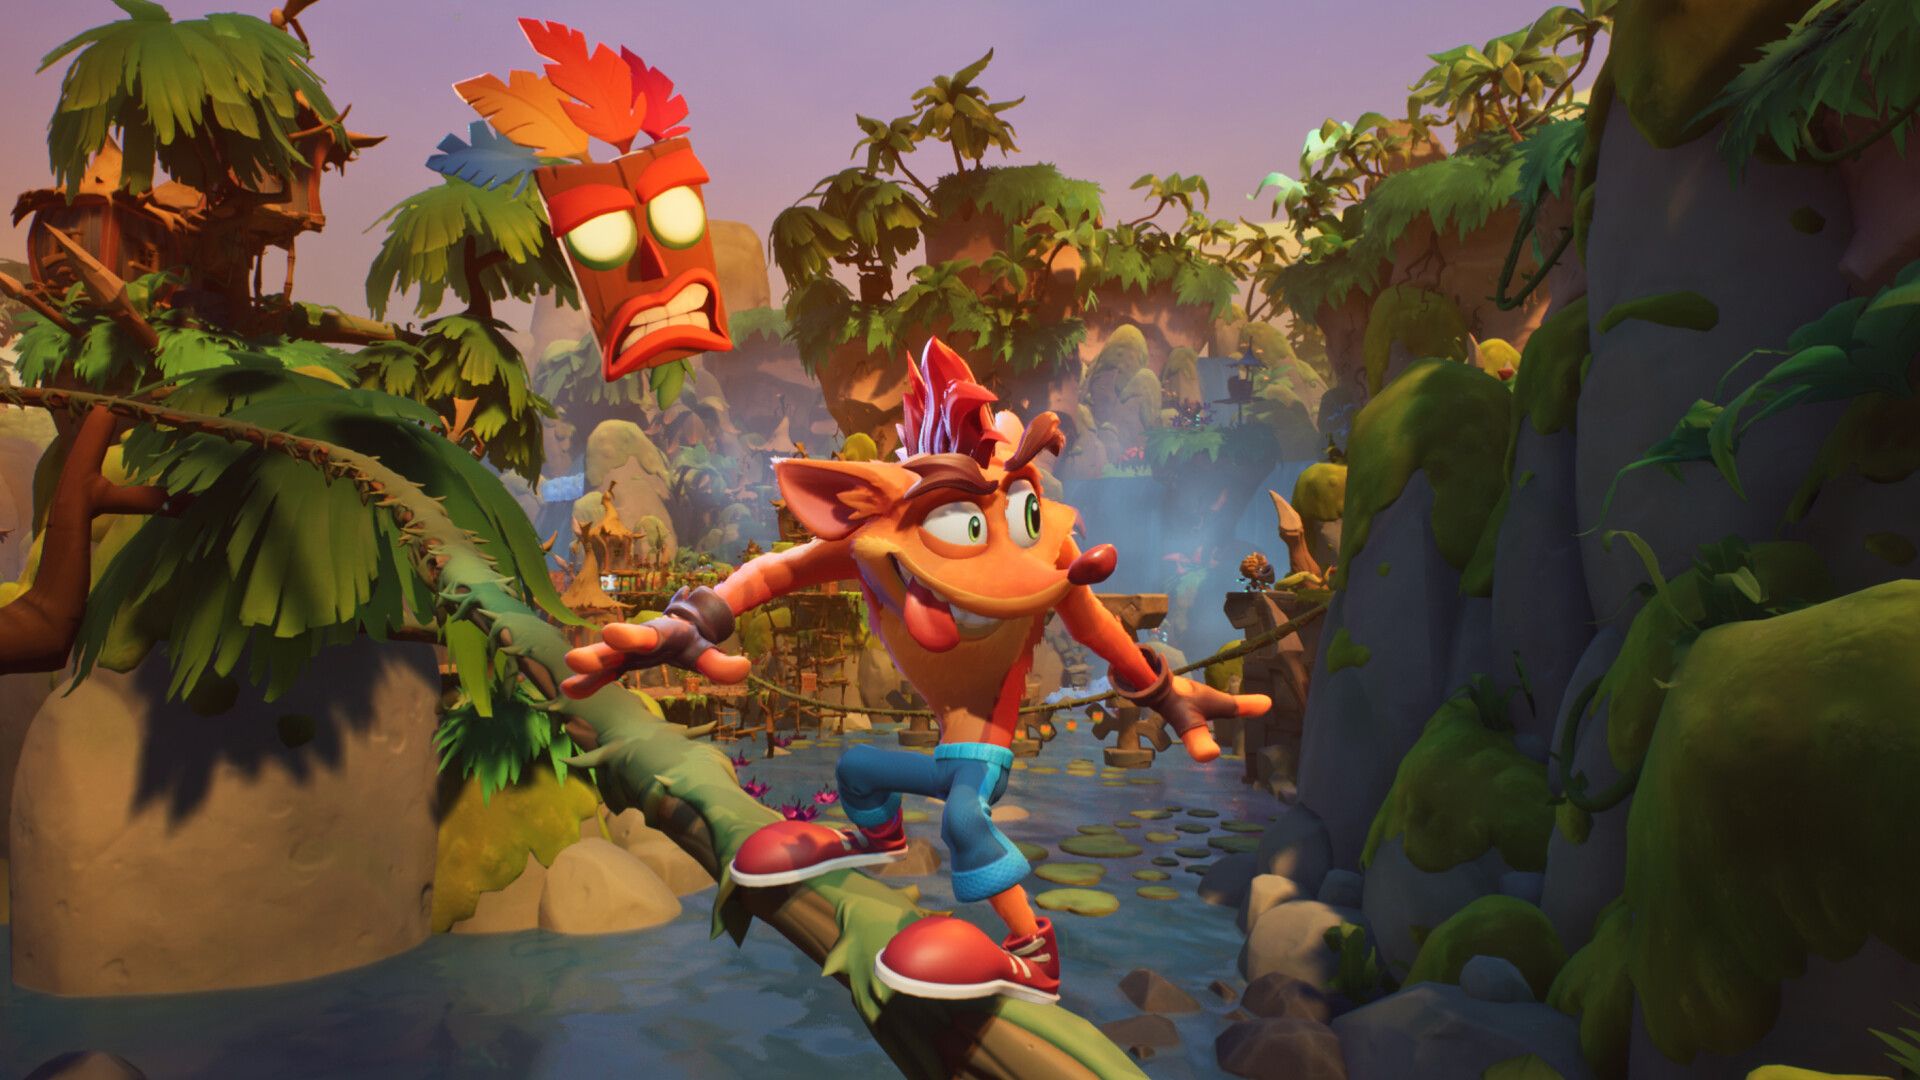 Crash Bandicoot 4 It's About Time seems to have sold well